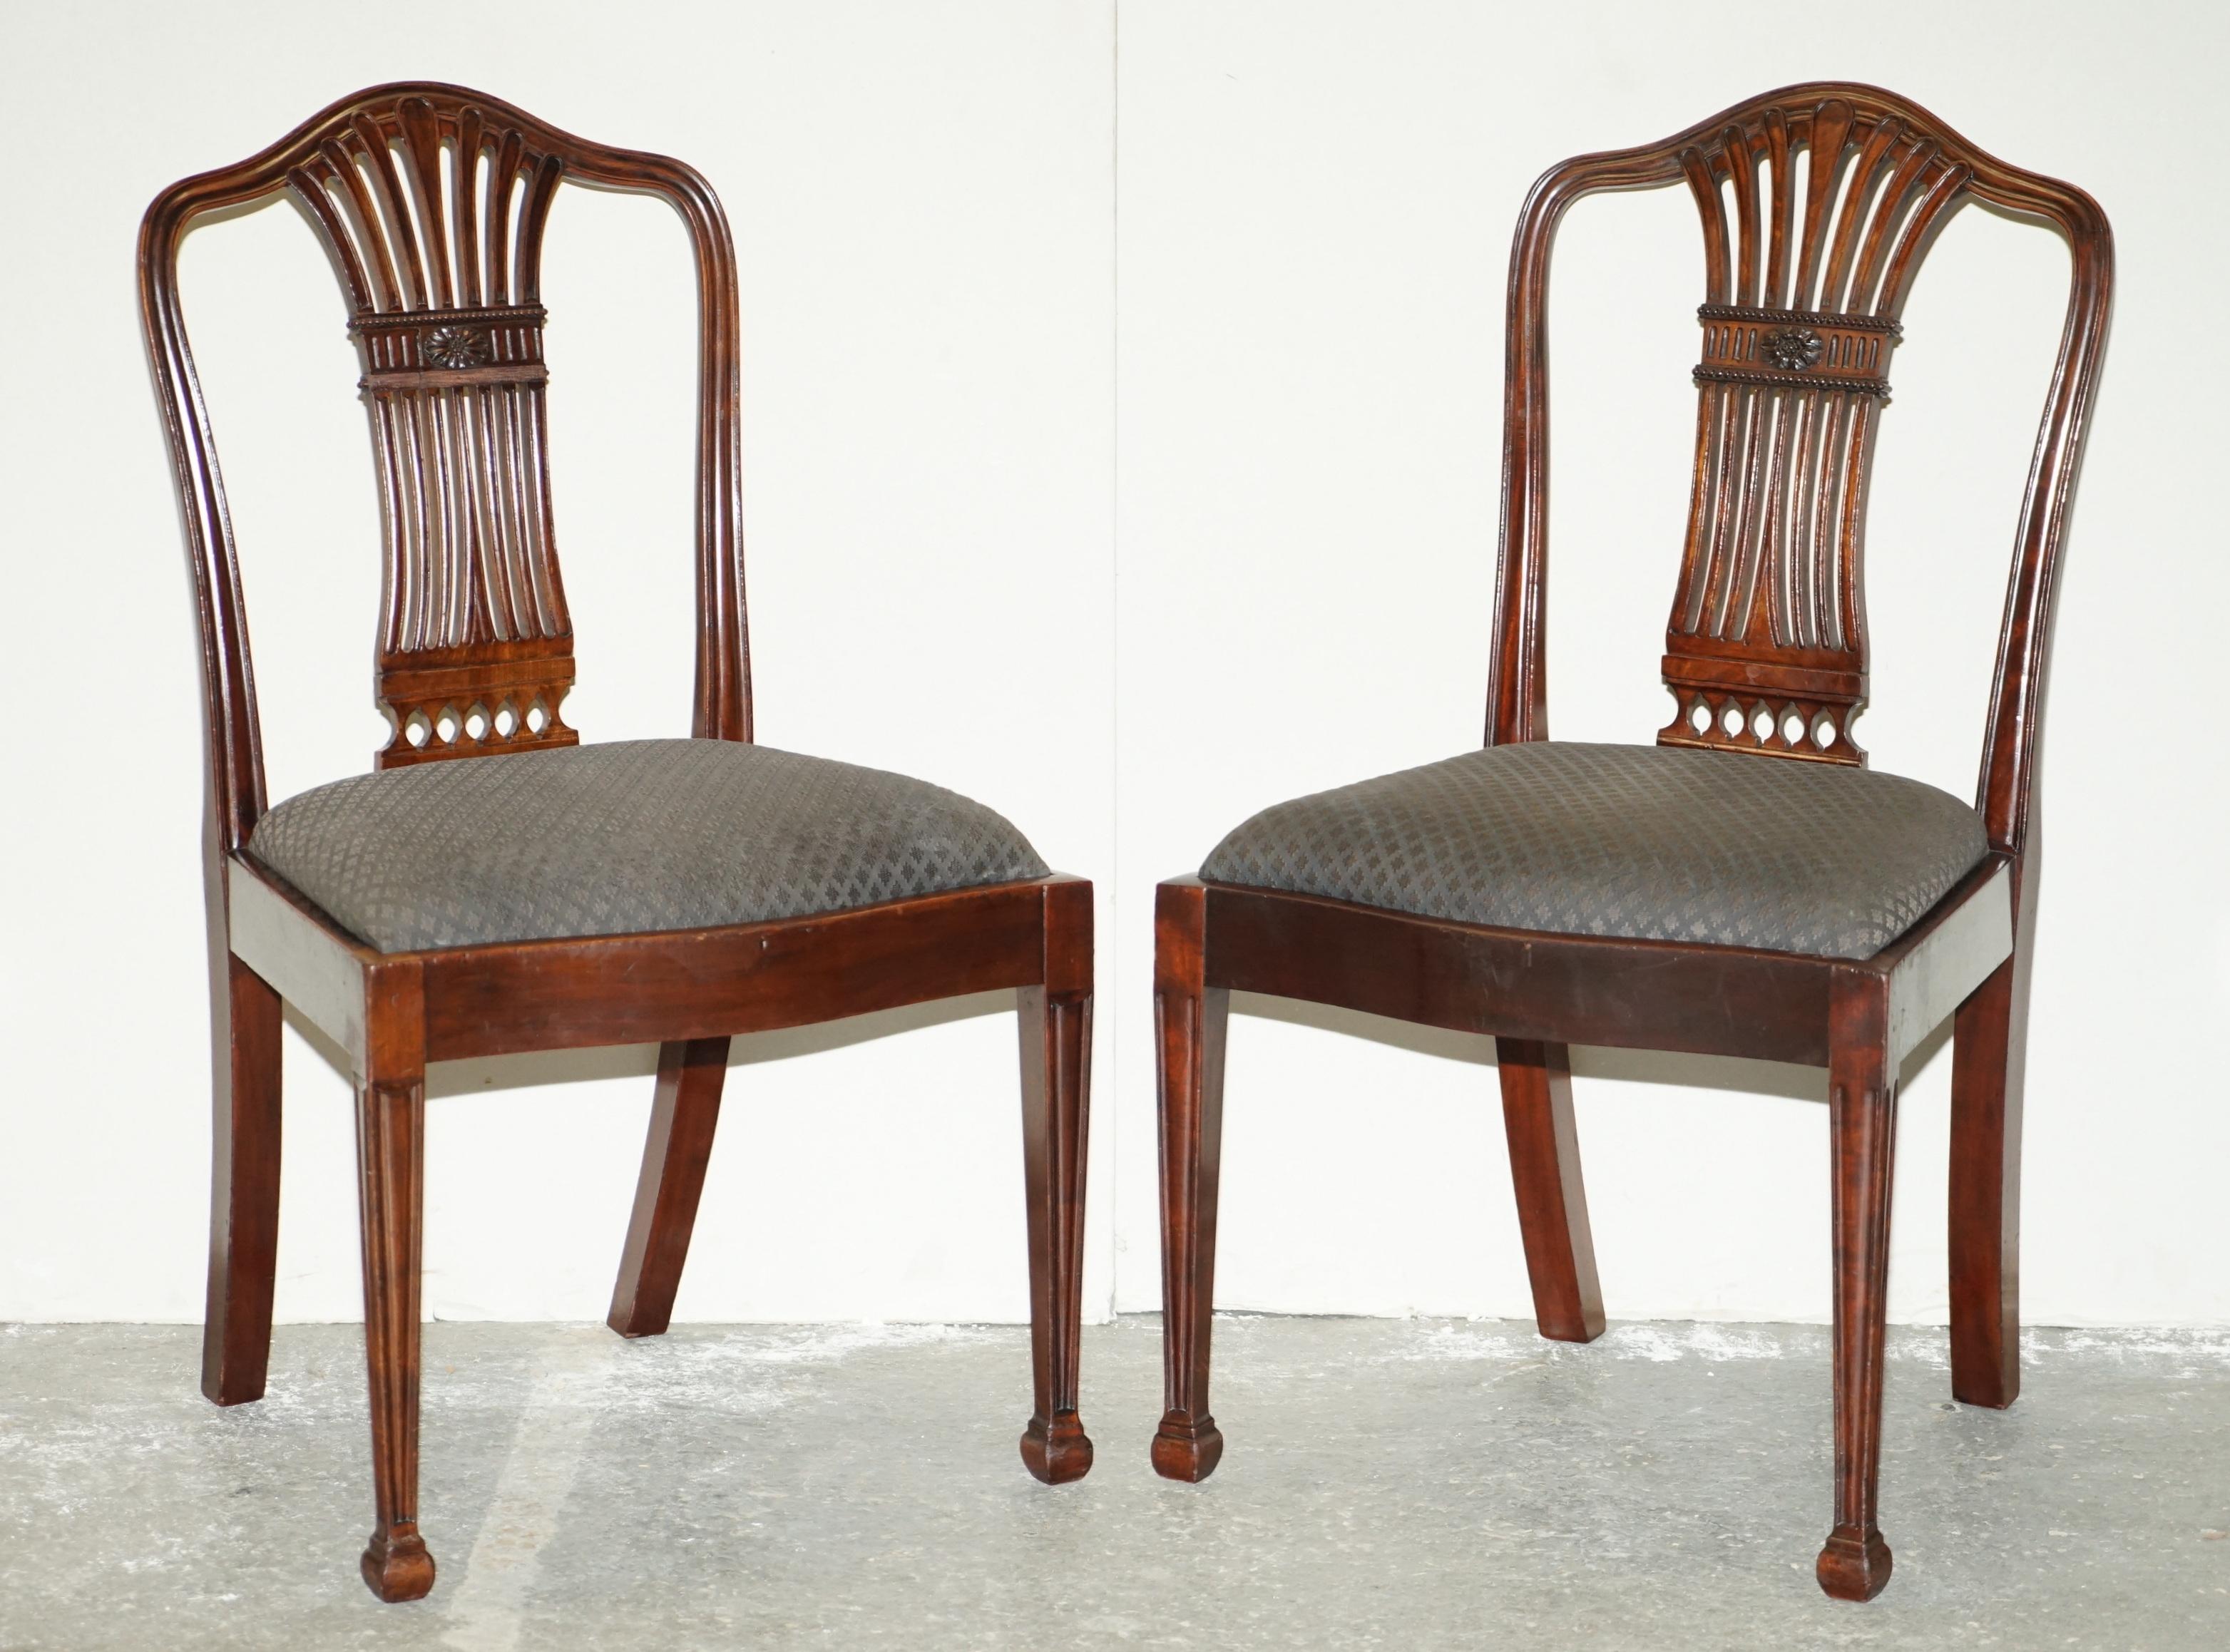 8 ANTIQUE GEORGE HEPPLEWHITE STYLE DINING CHAIRS FROM LADY DIANA'S SPENCER HOUSE im Angebot 9